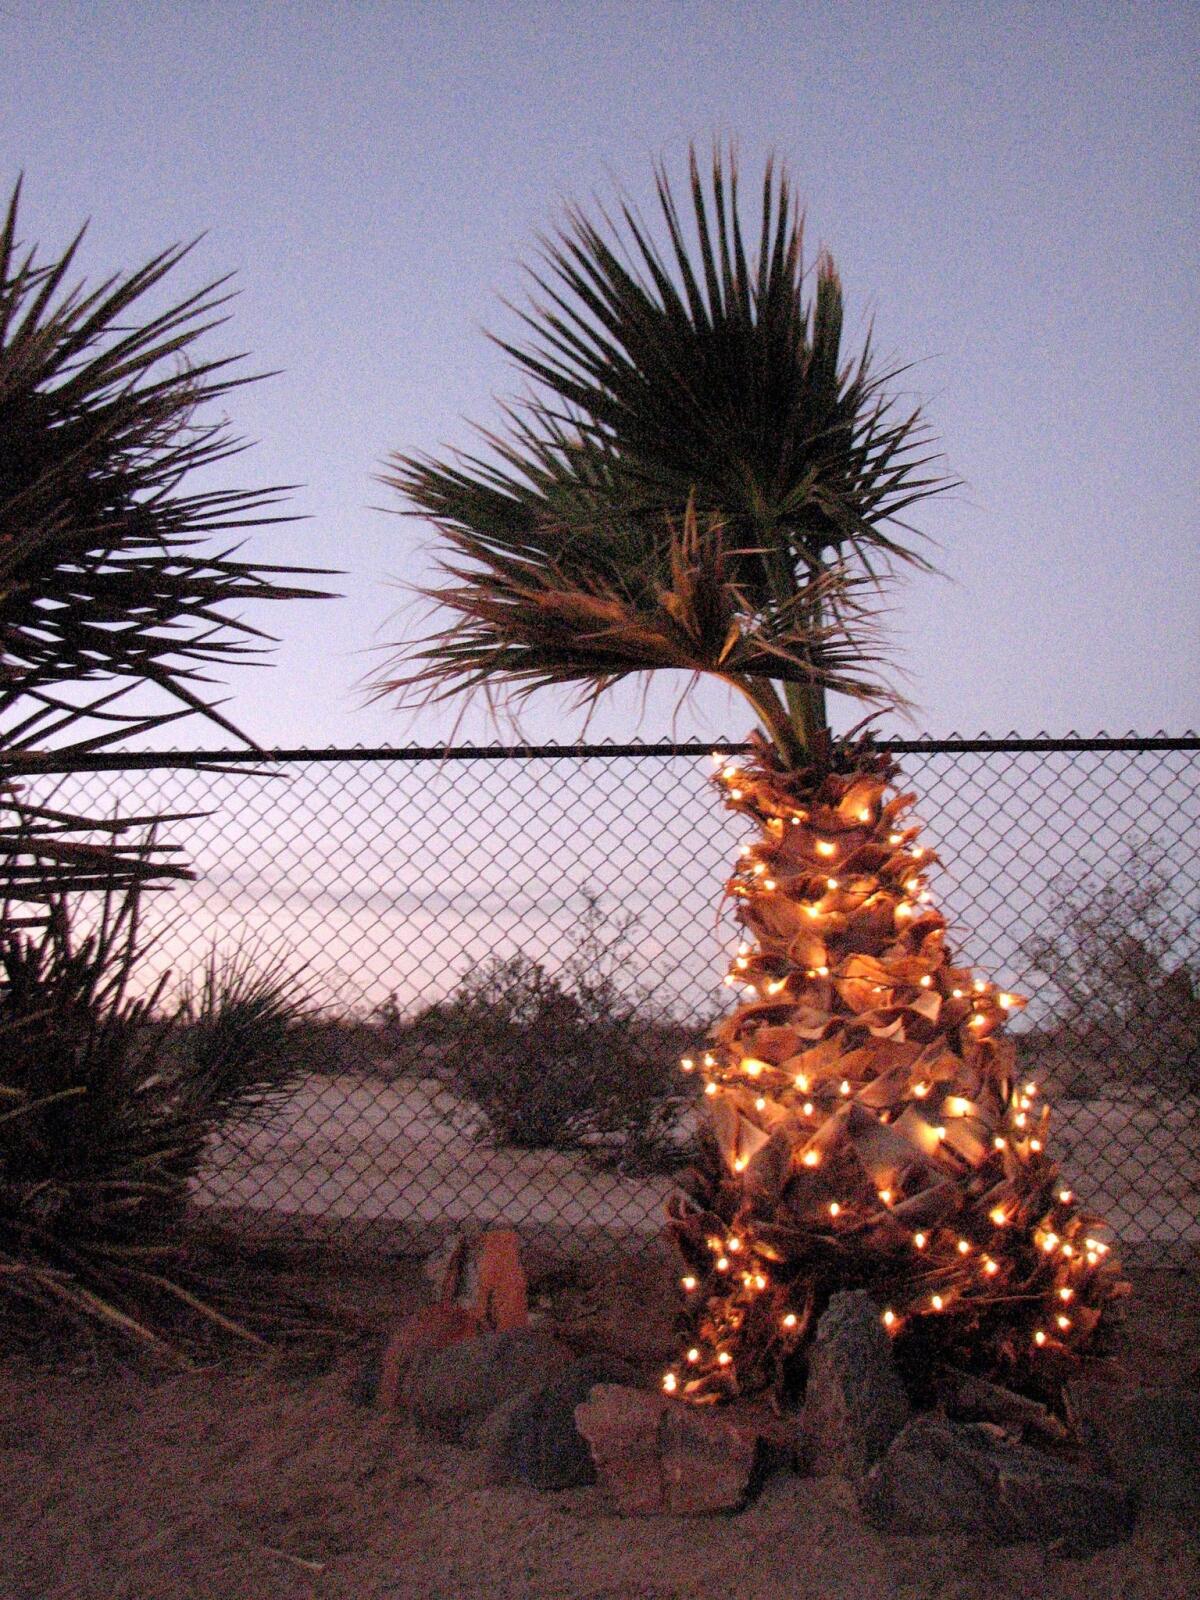 A transplanted New Englander adjusts to celebrating the holidays in Southern California.